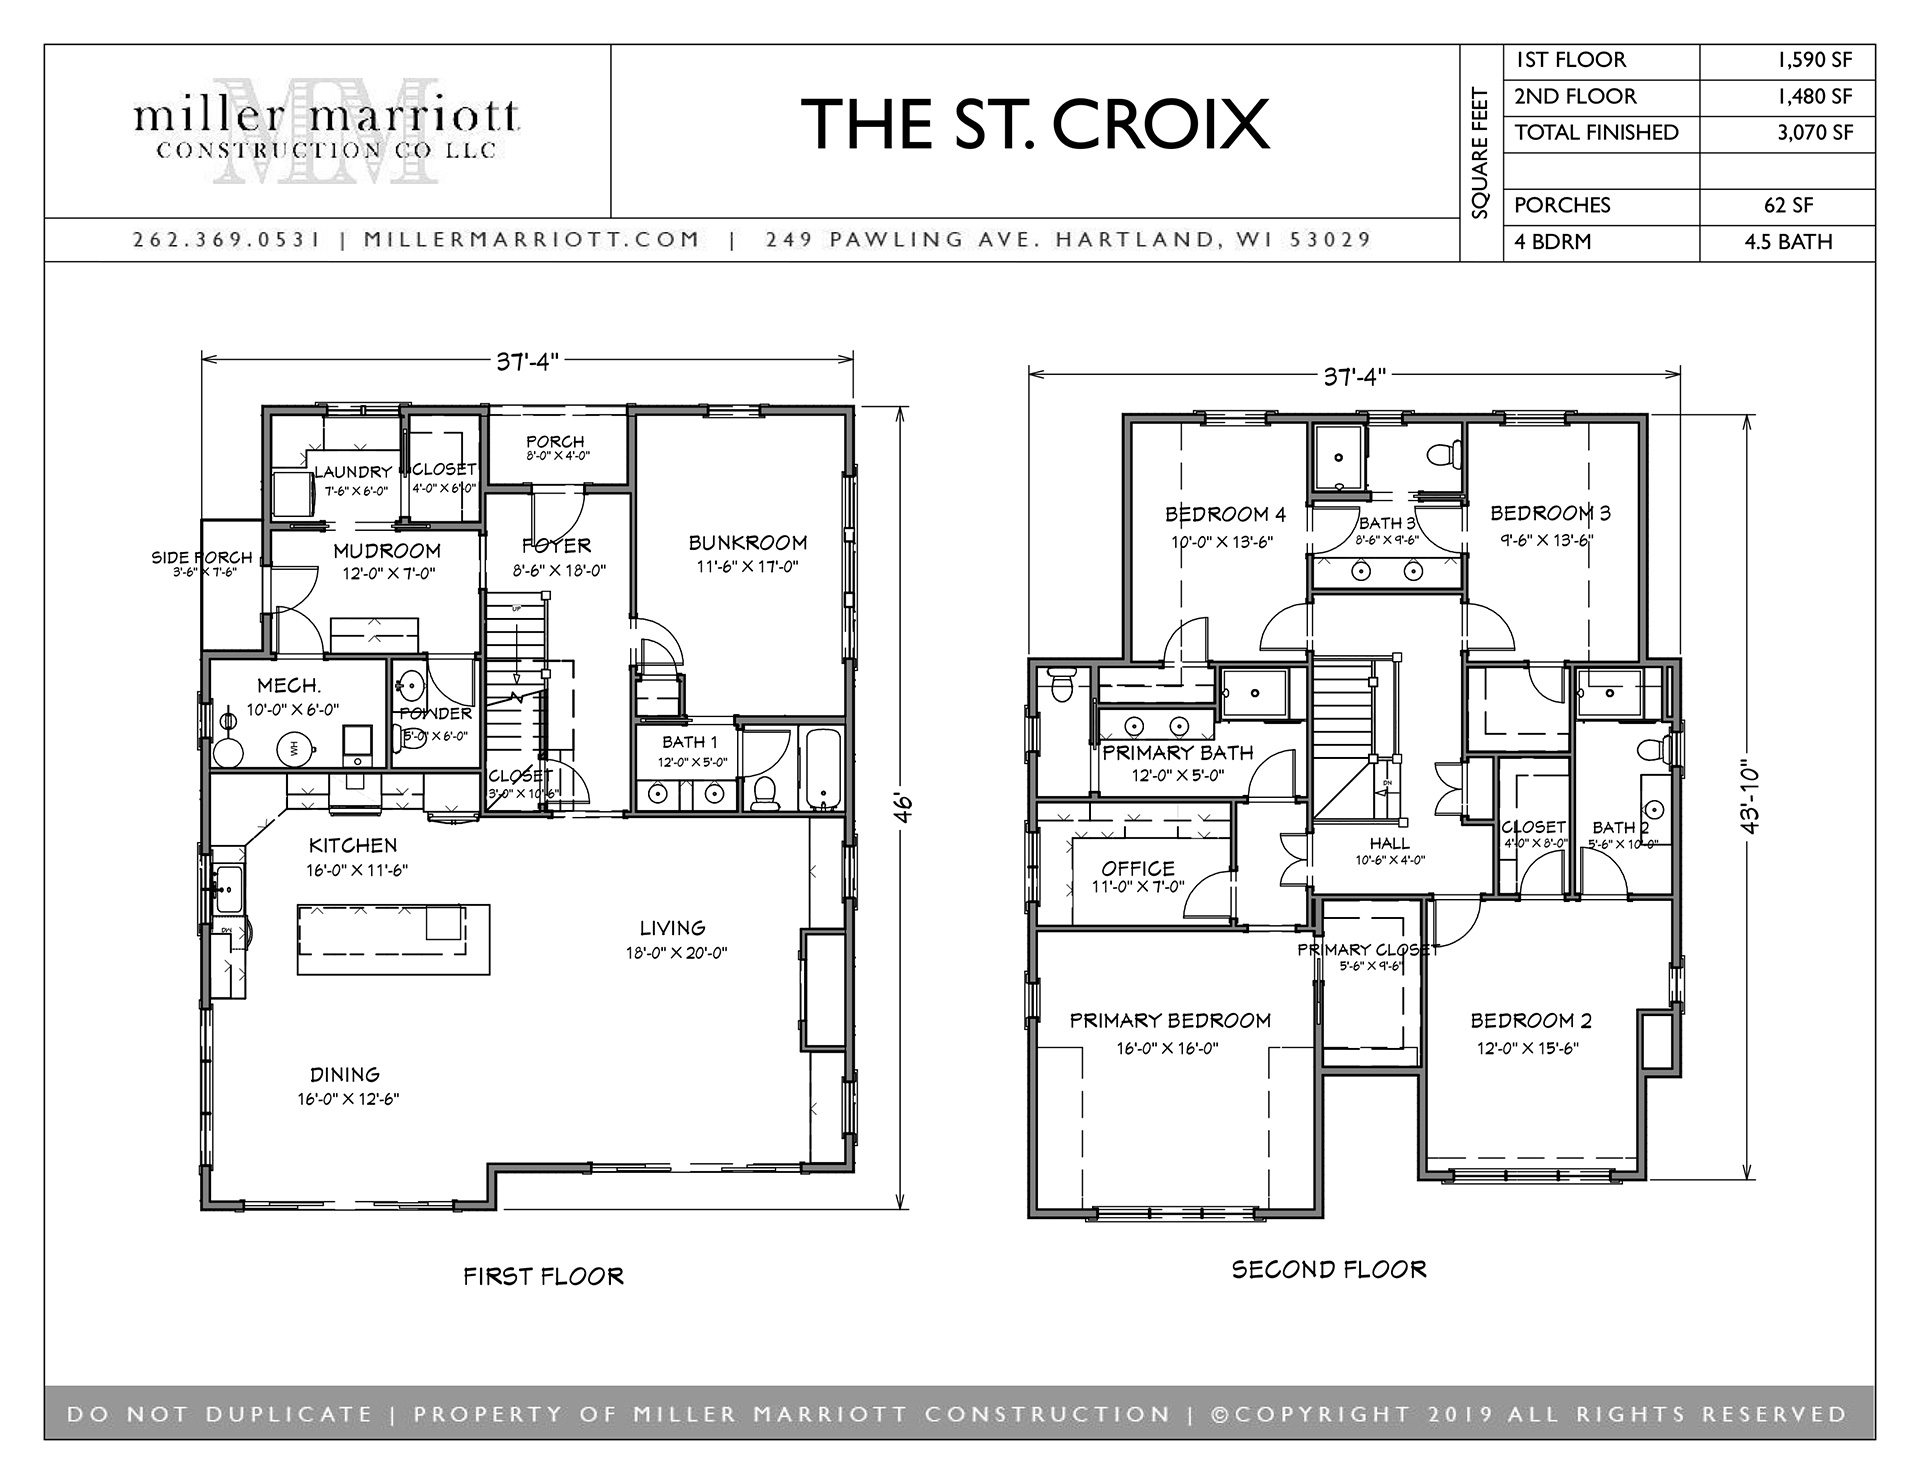 The St. Croix 1st and 2nd floor plan